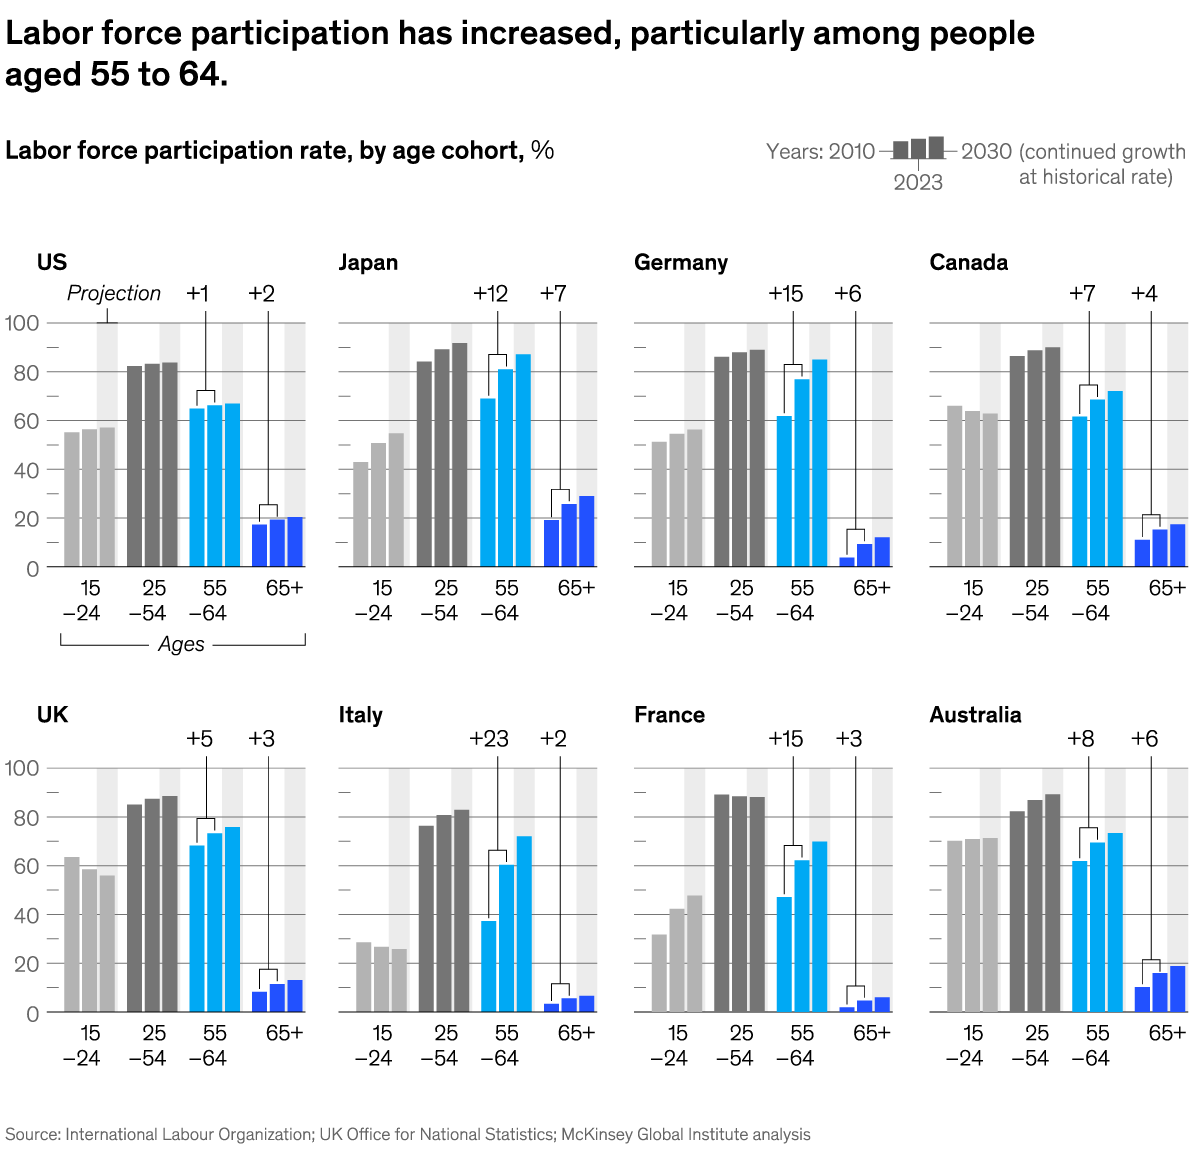 A chart titled “Labor force participation has increased, particularly among people aged 55 to 64.” Click to open the full article on McKinsey.com.